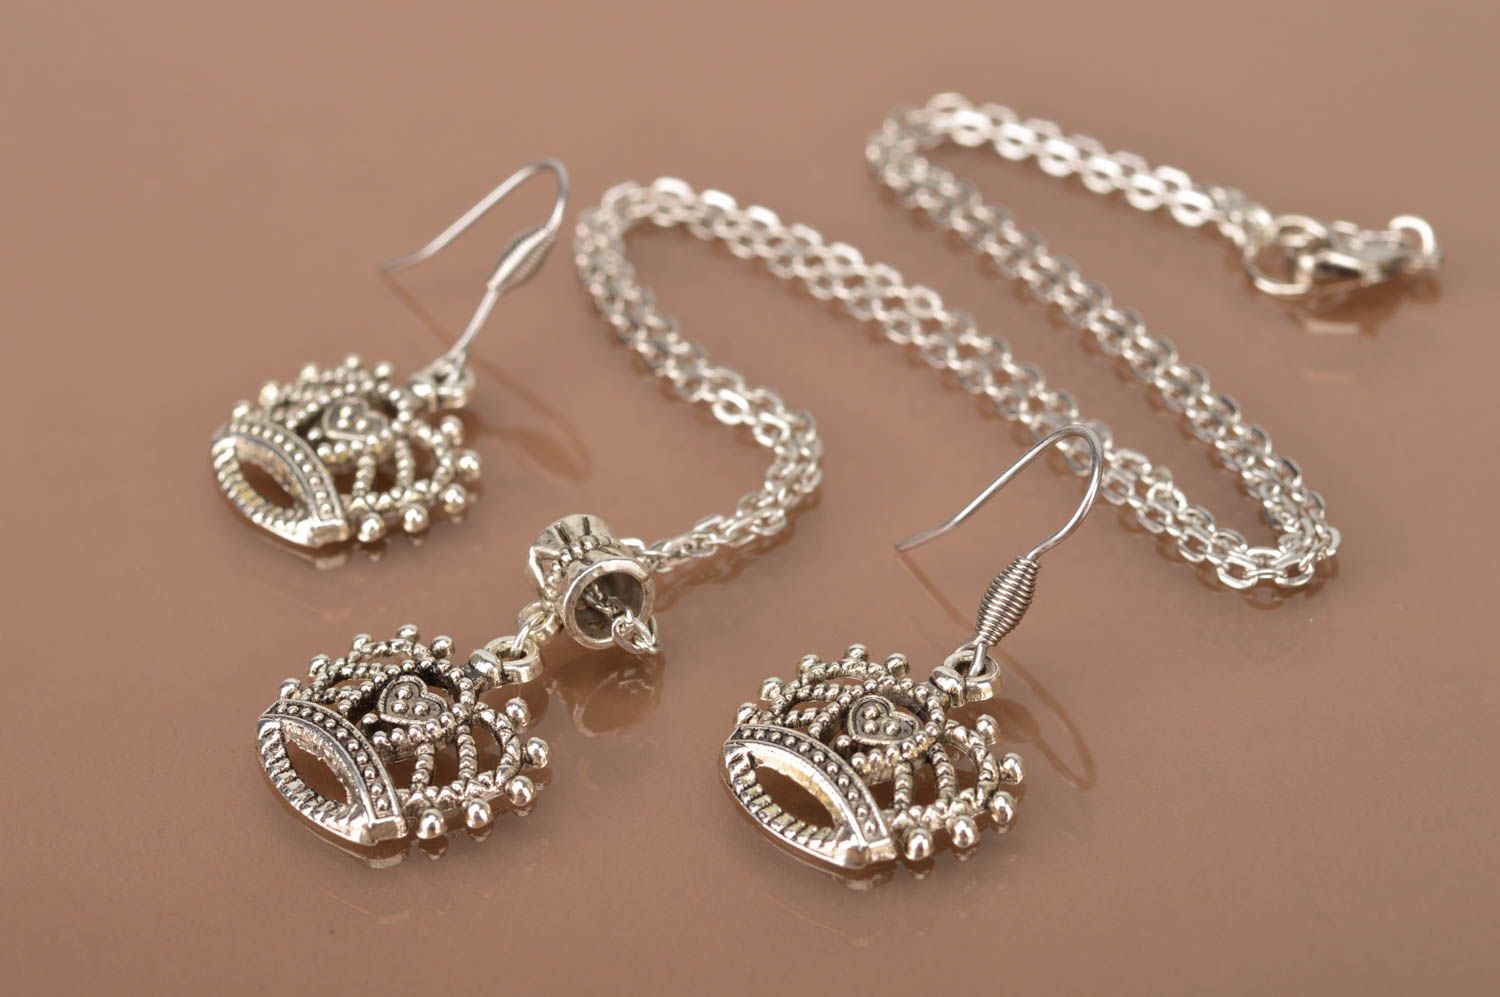 Beautiful jewelry set handmade metal pendant and earrings gifts for her photo 4